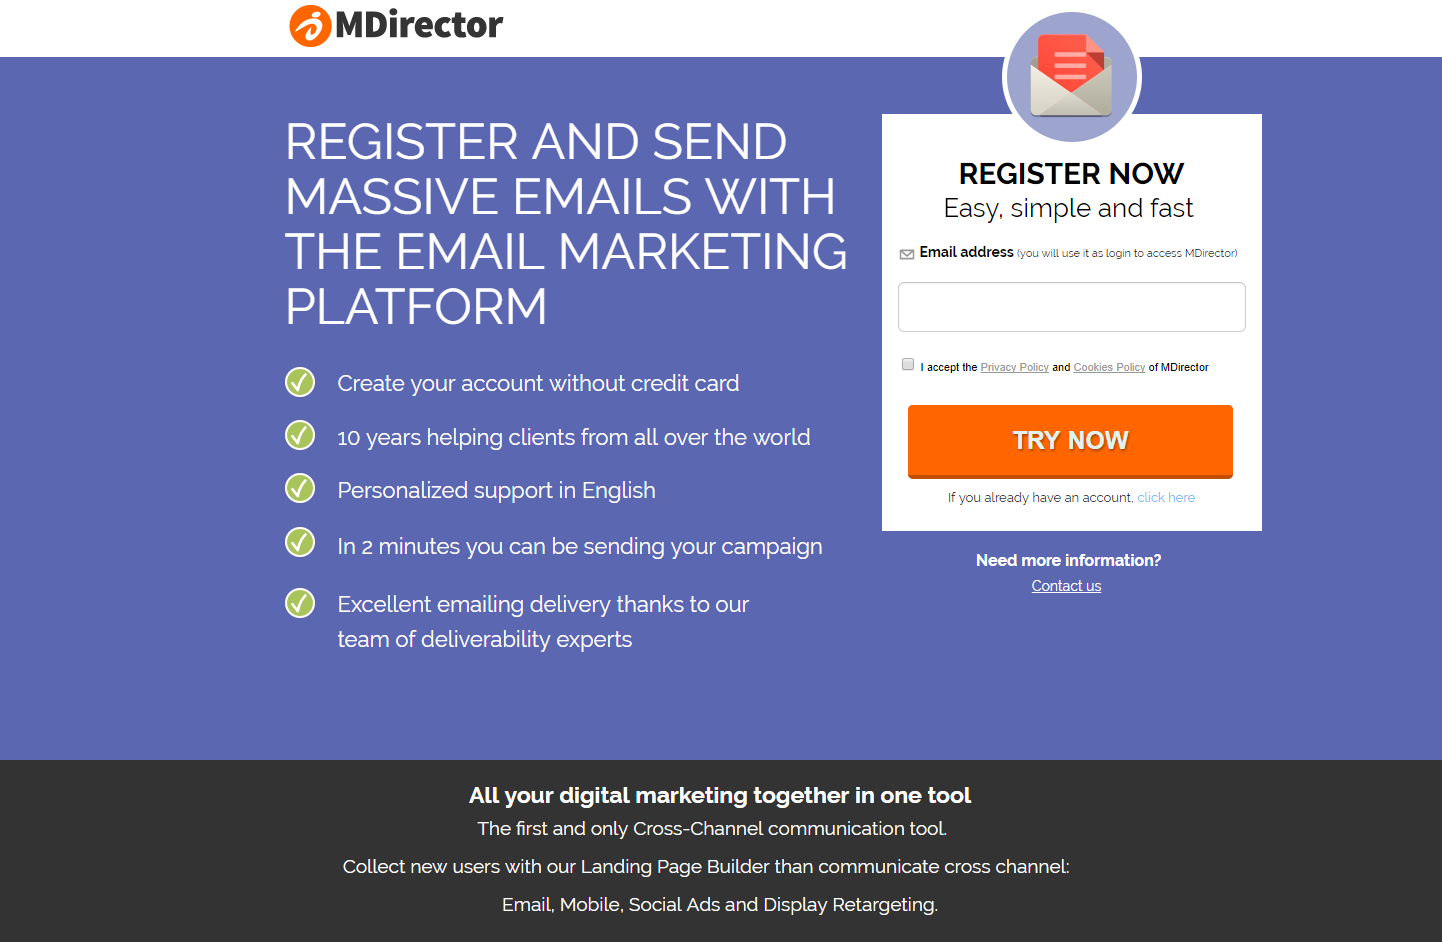 examples of perfect landing pages: MDirector